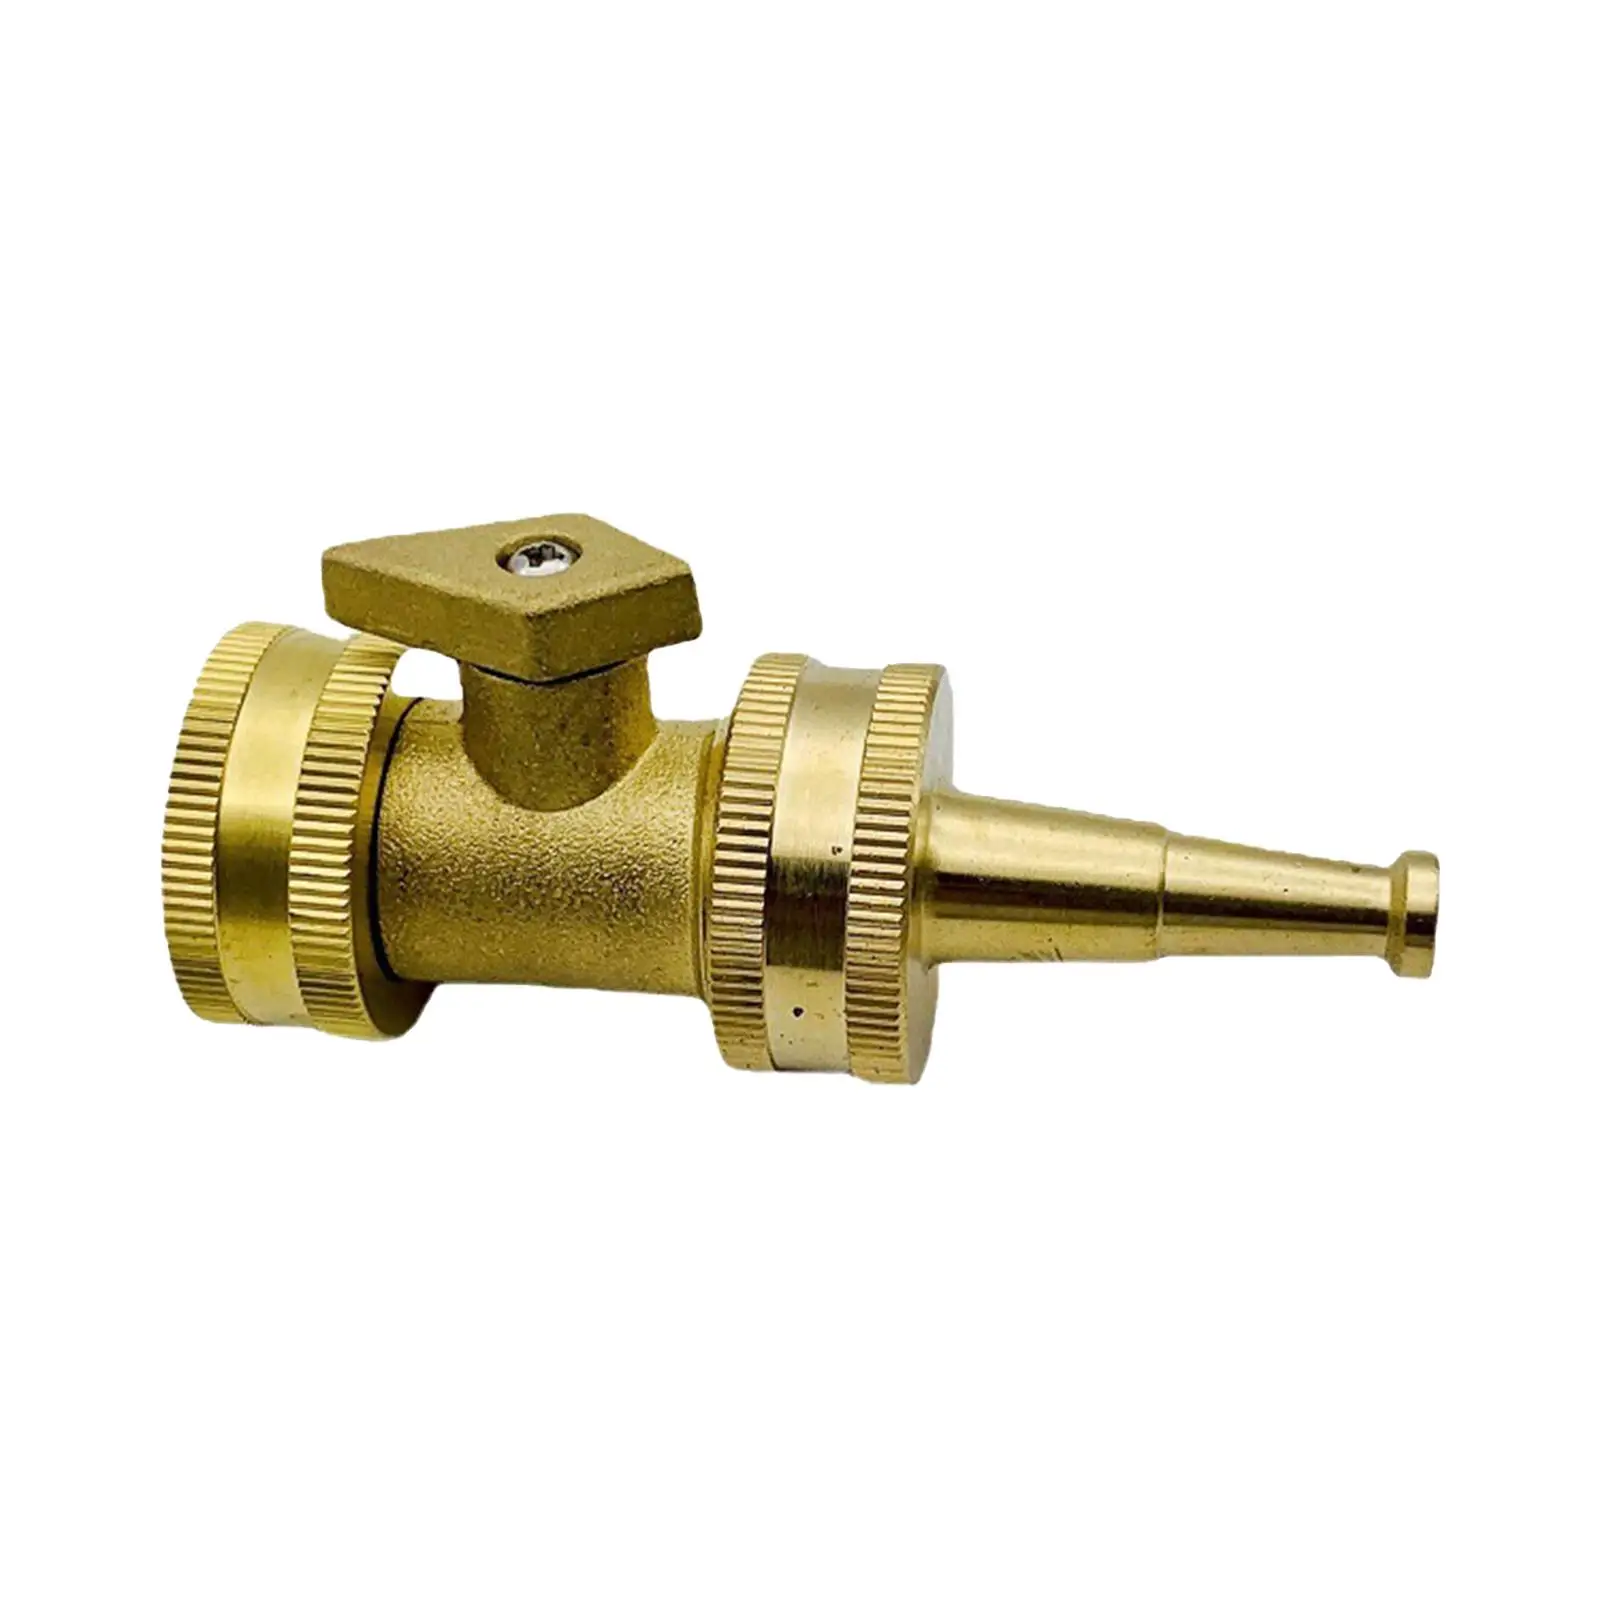 Twist Hose Nozzle with Hose Shut Off switch Brass Sweeper Nozzle Water Hose Sprayer Nozzle for Driveway Washing Car Outdoor Deck